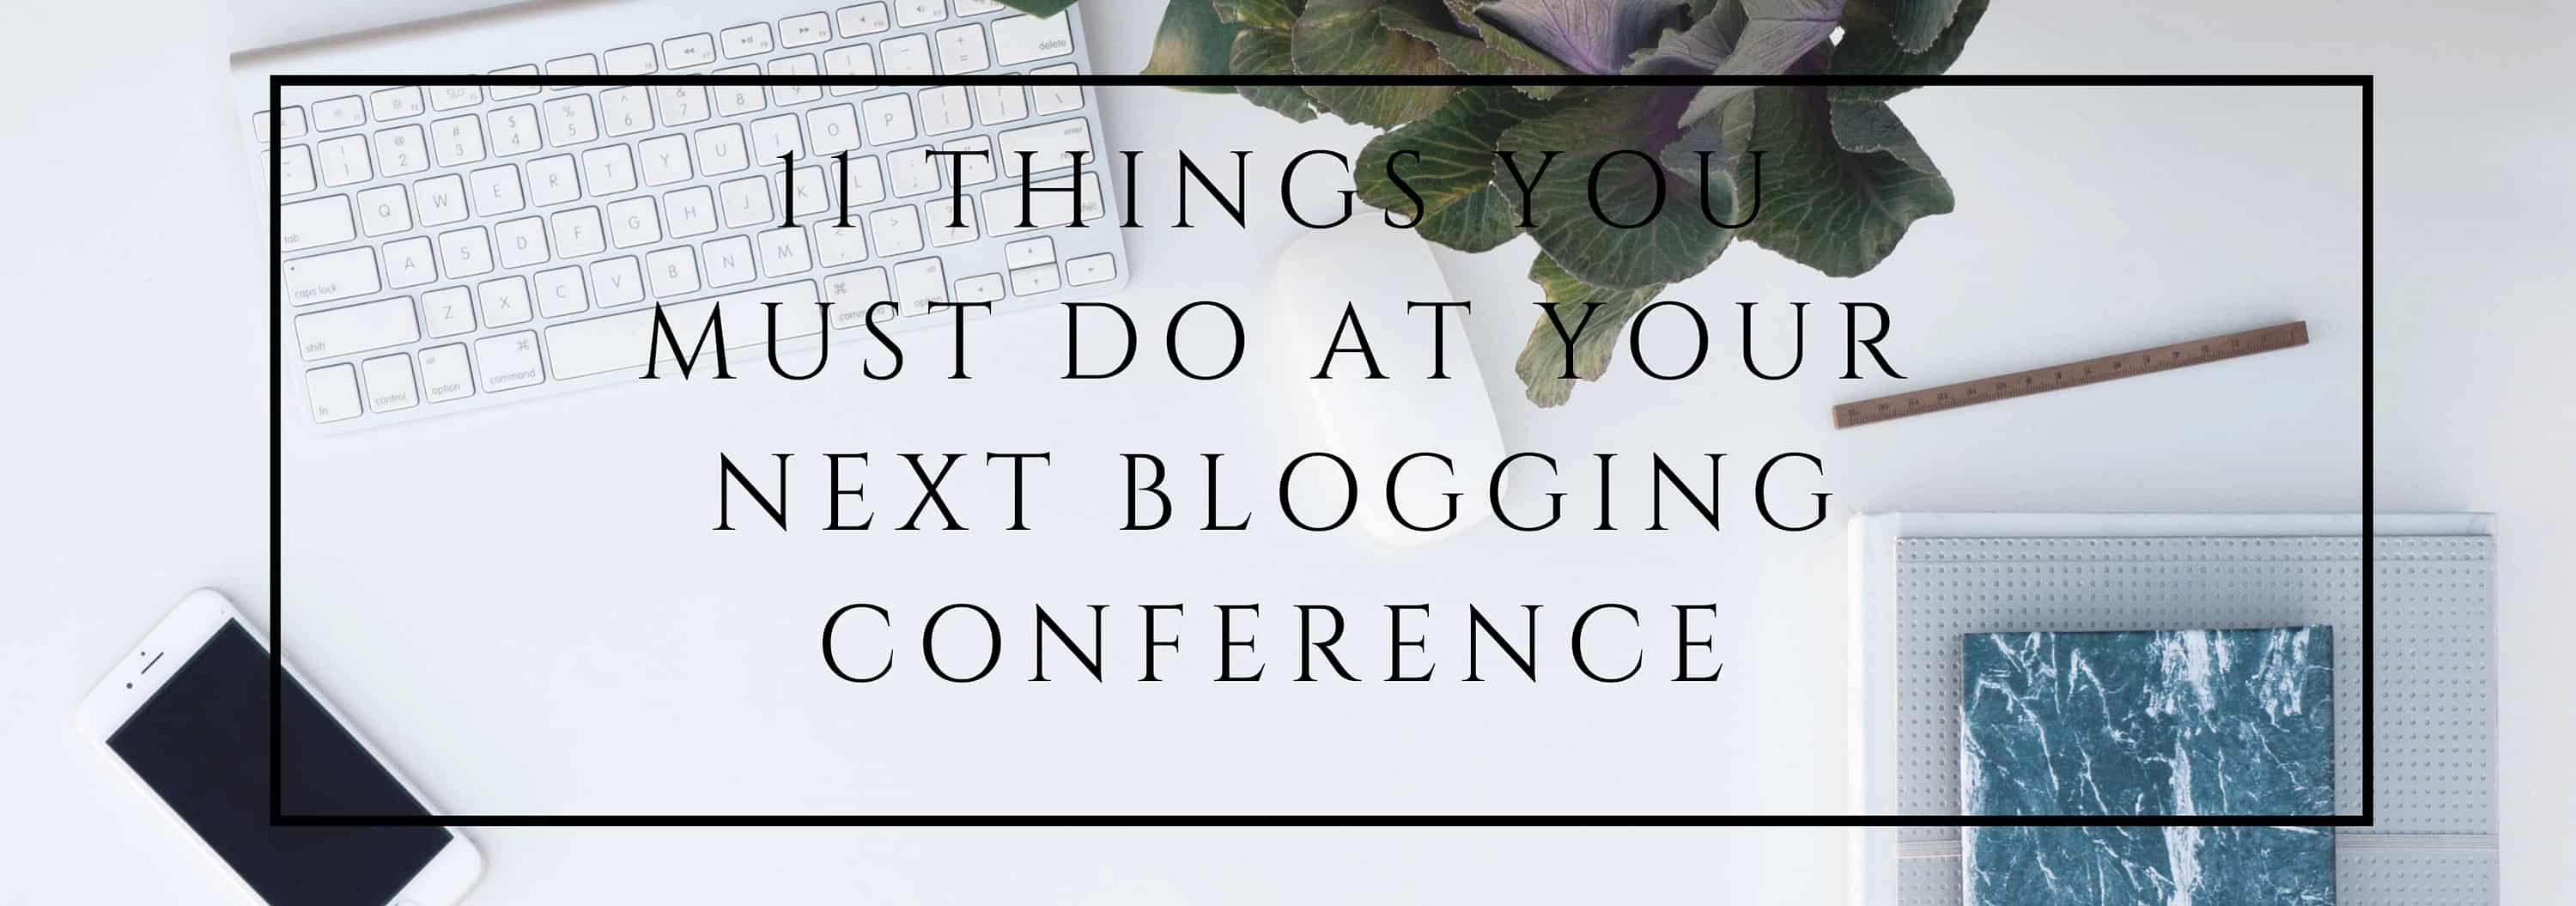 11 things you must do at your next blogging conference